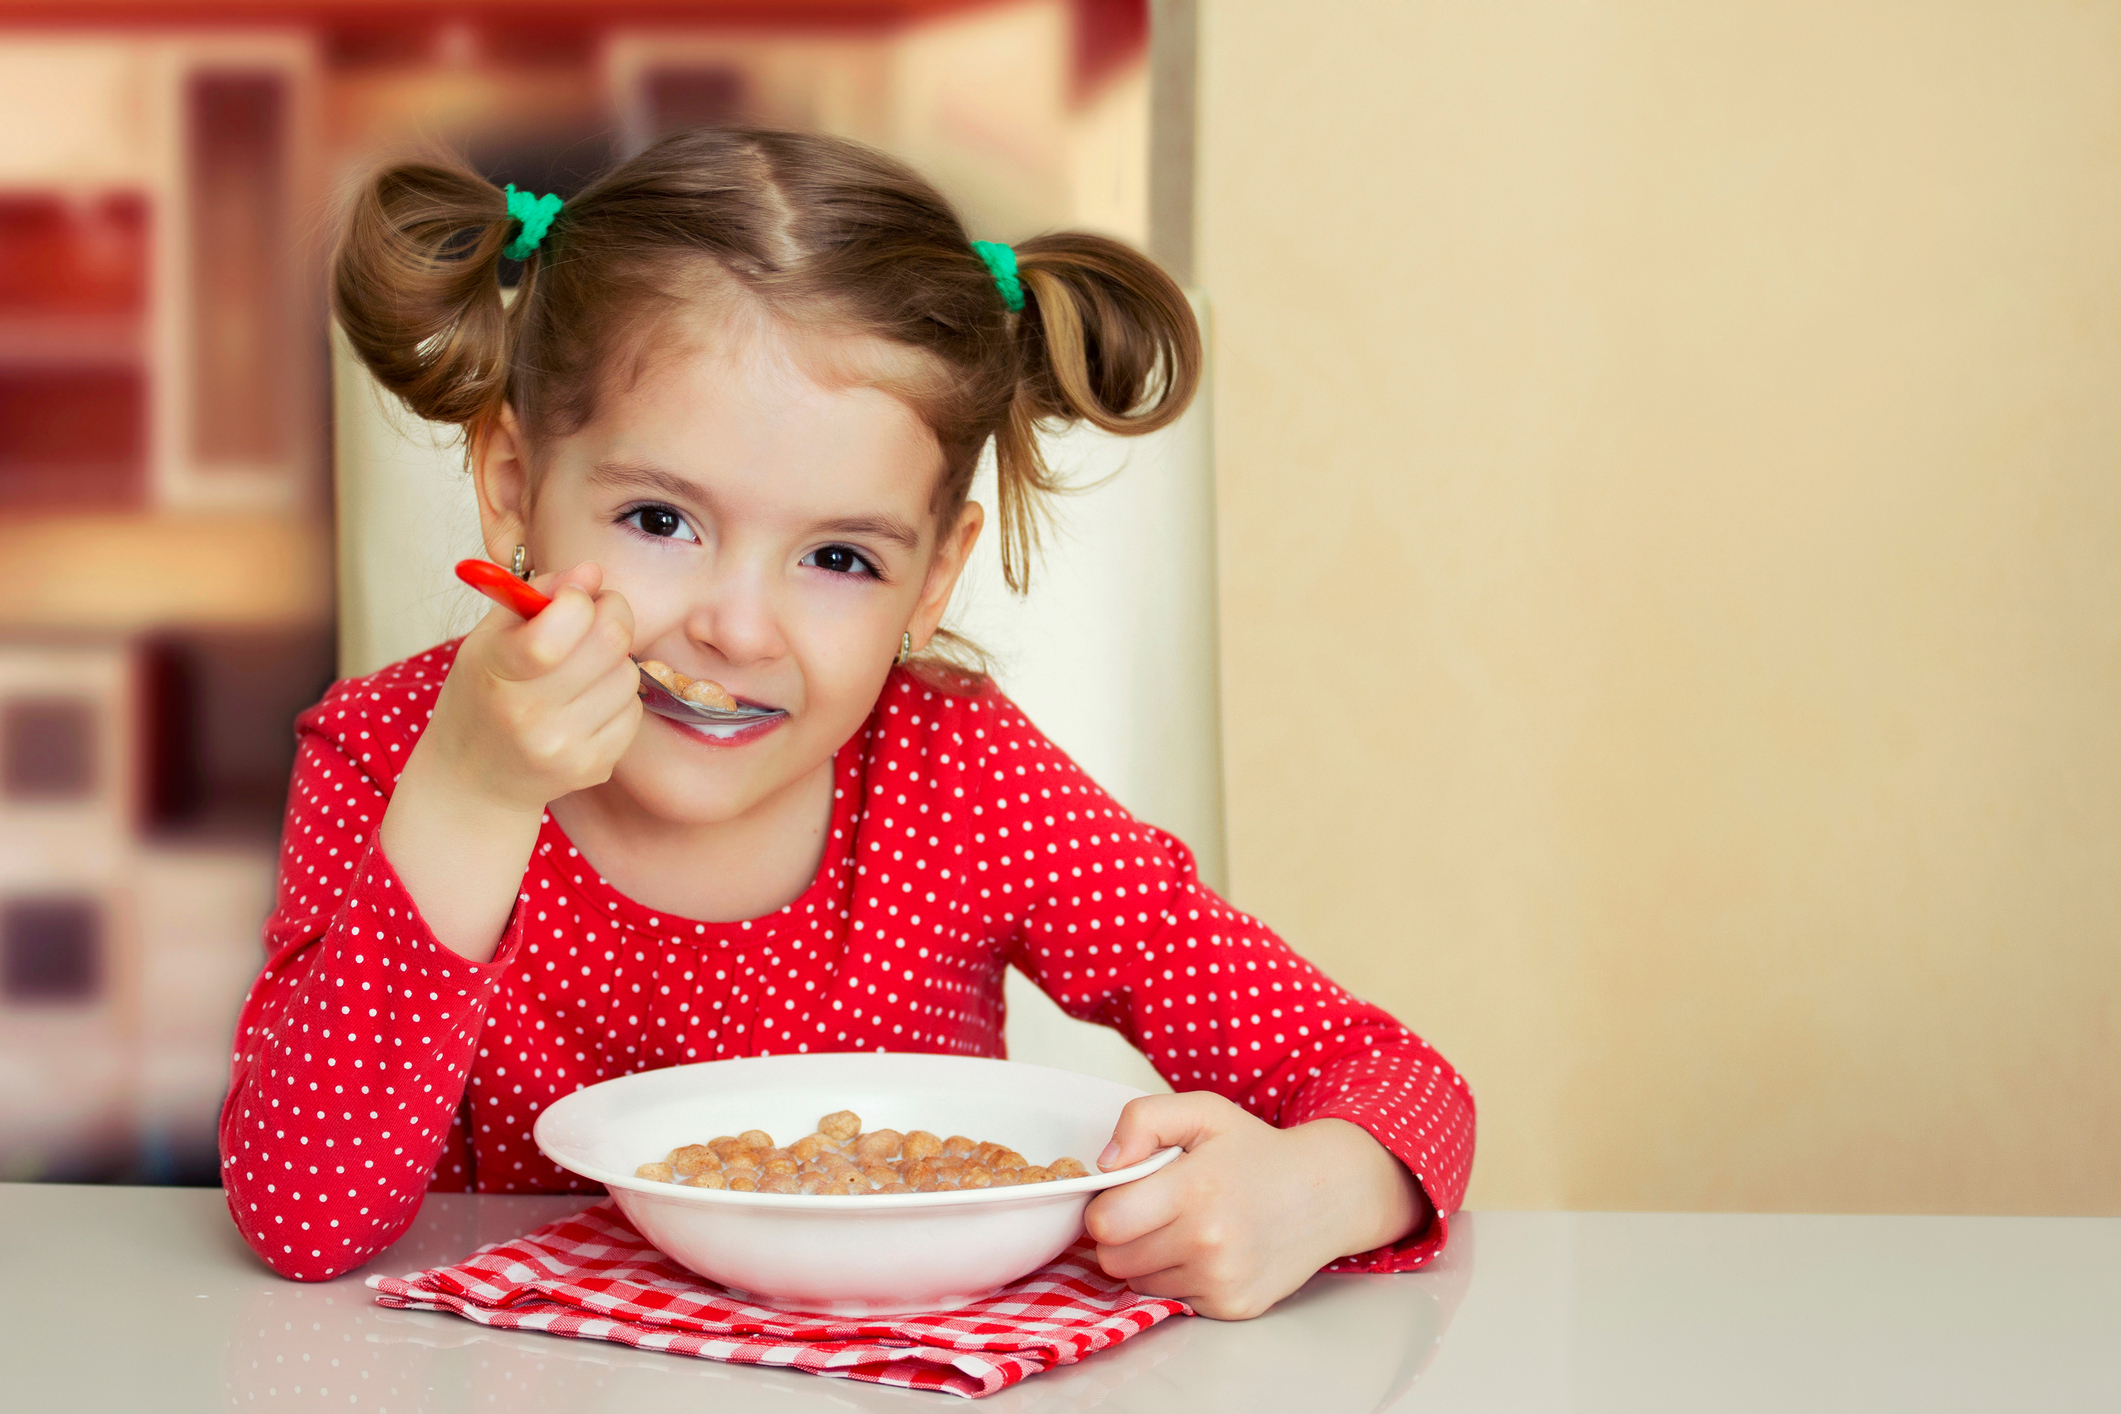 Feeding Therapy - Young Girl Eating Cereal